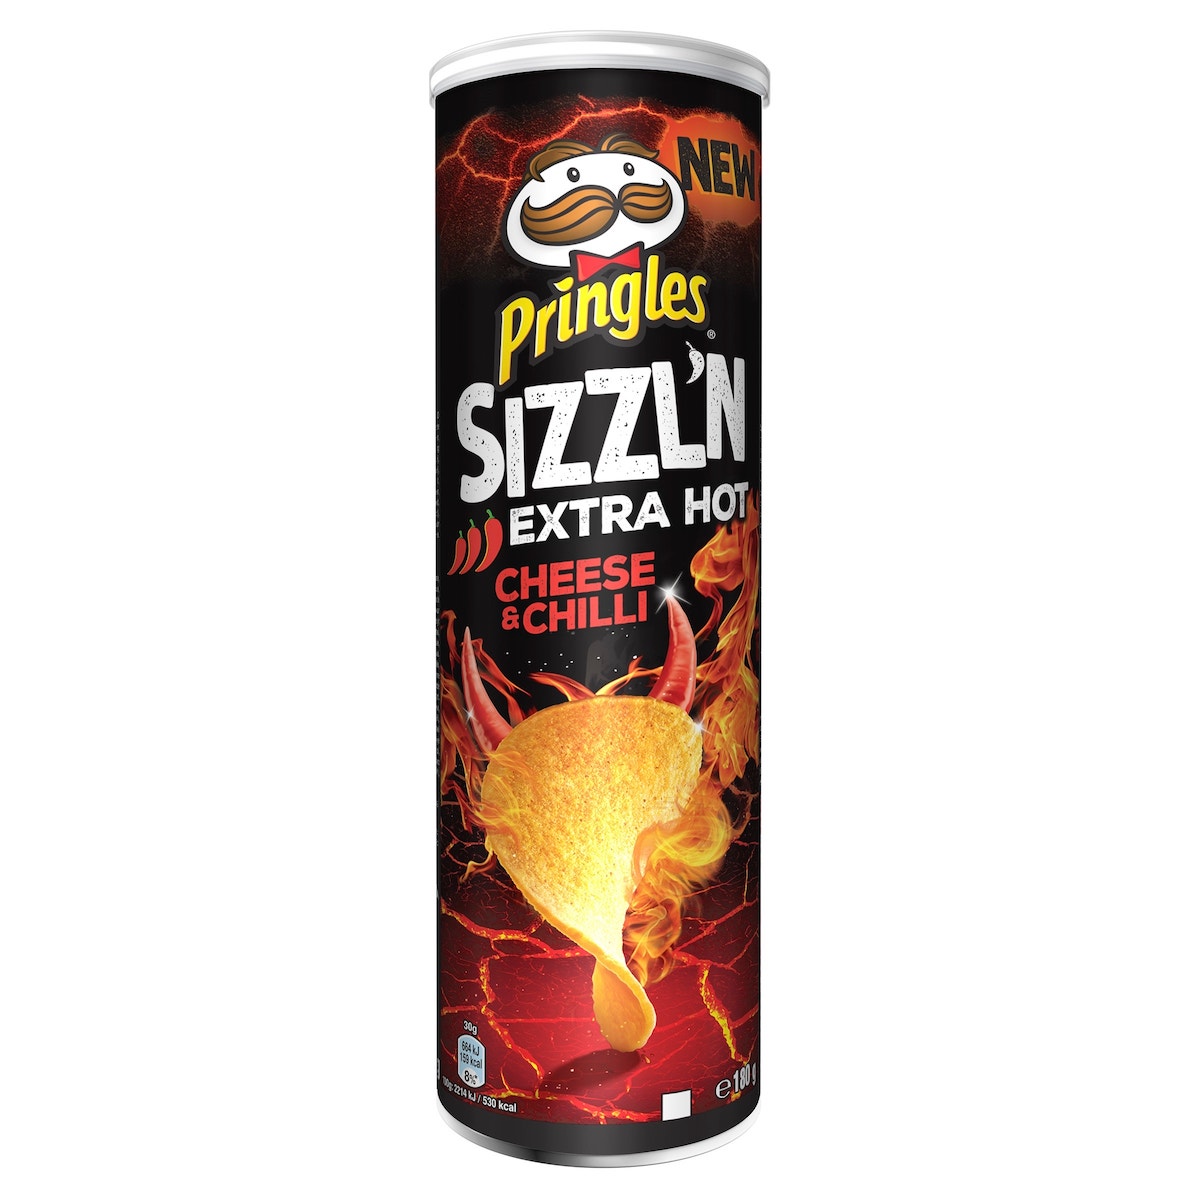 Pringles Sizzl'n Extra Hot Cheese & Chilli 180g